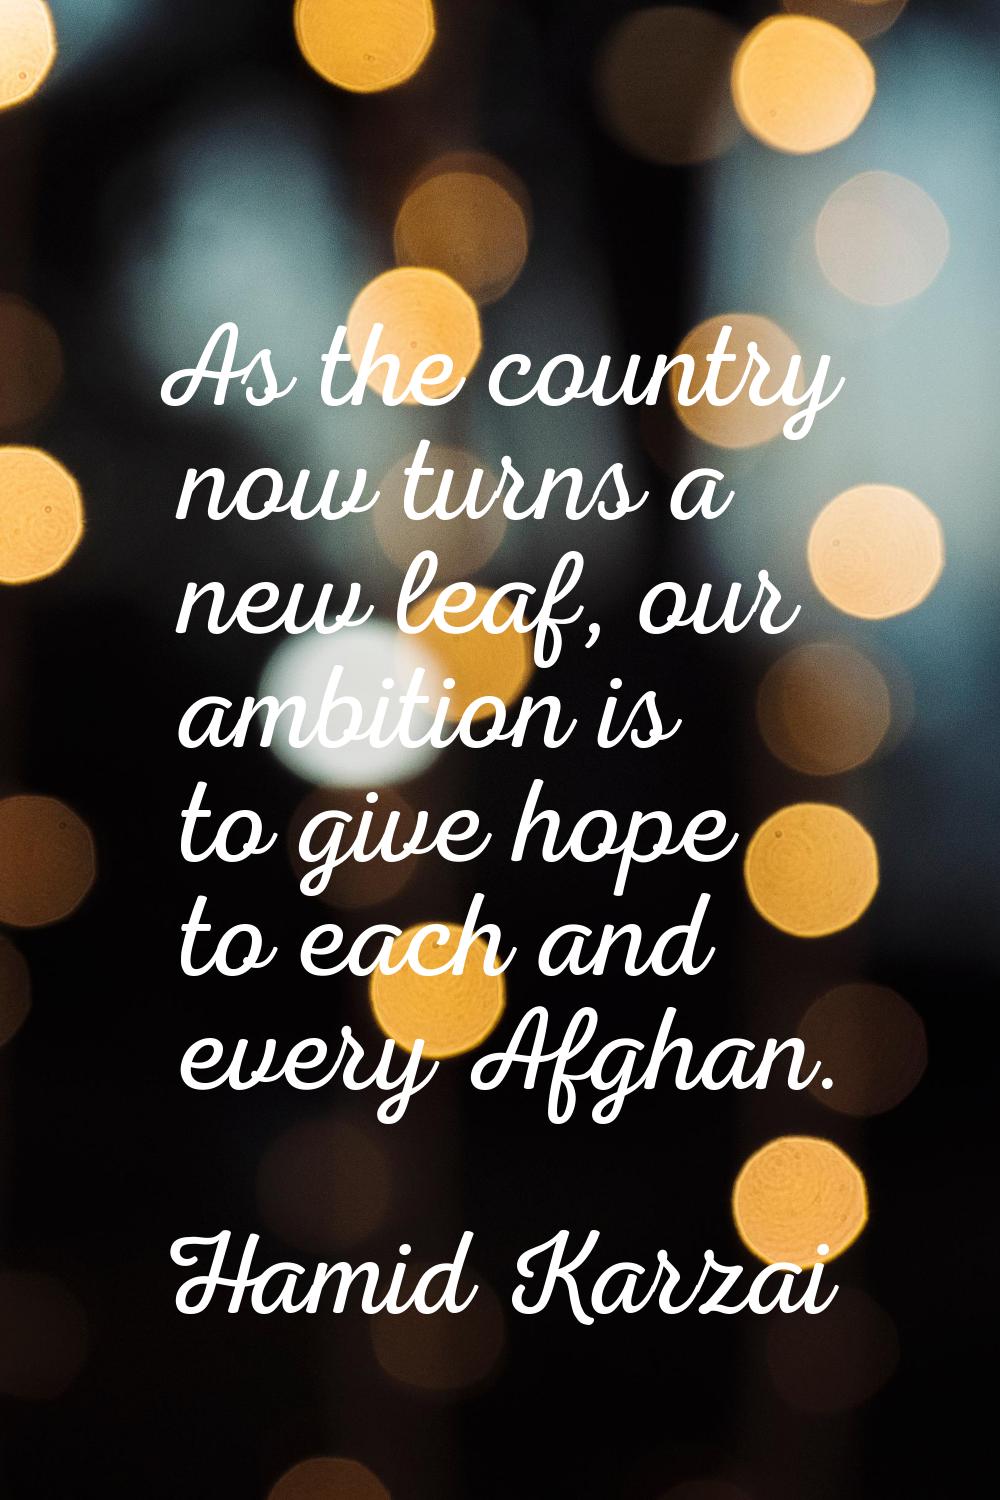 As the country now turns a new leaf, our ambition is to give hope to each and every Afghan.